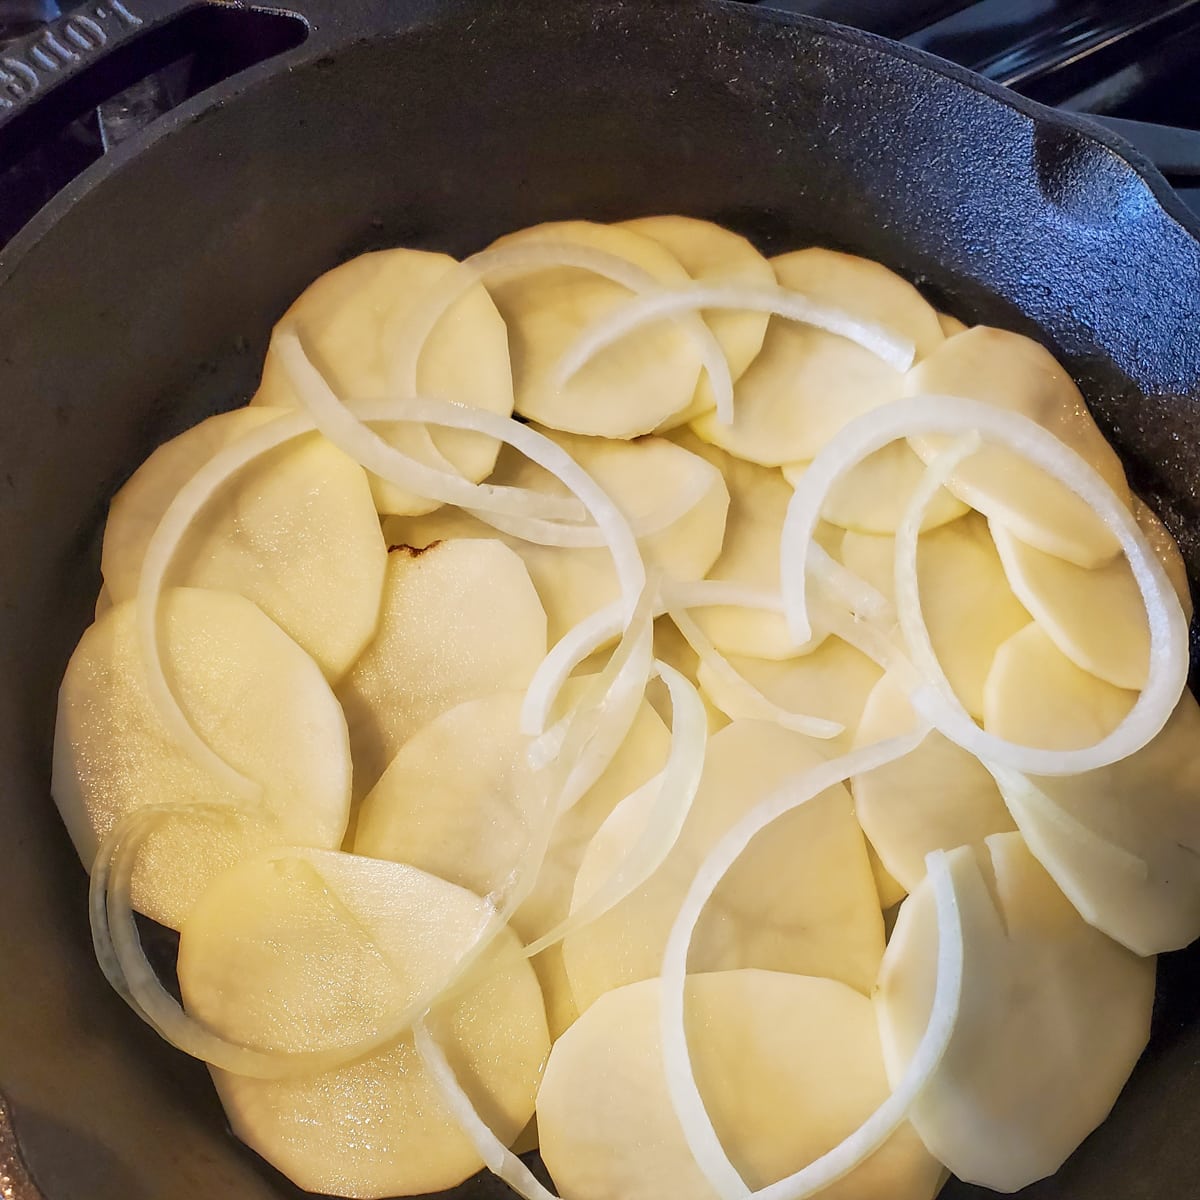 Potato and onion slices layers in a cast iron pan.